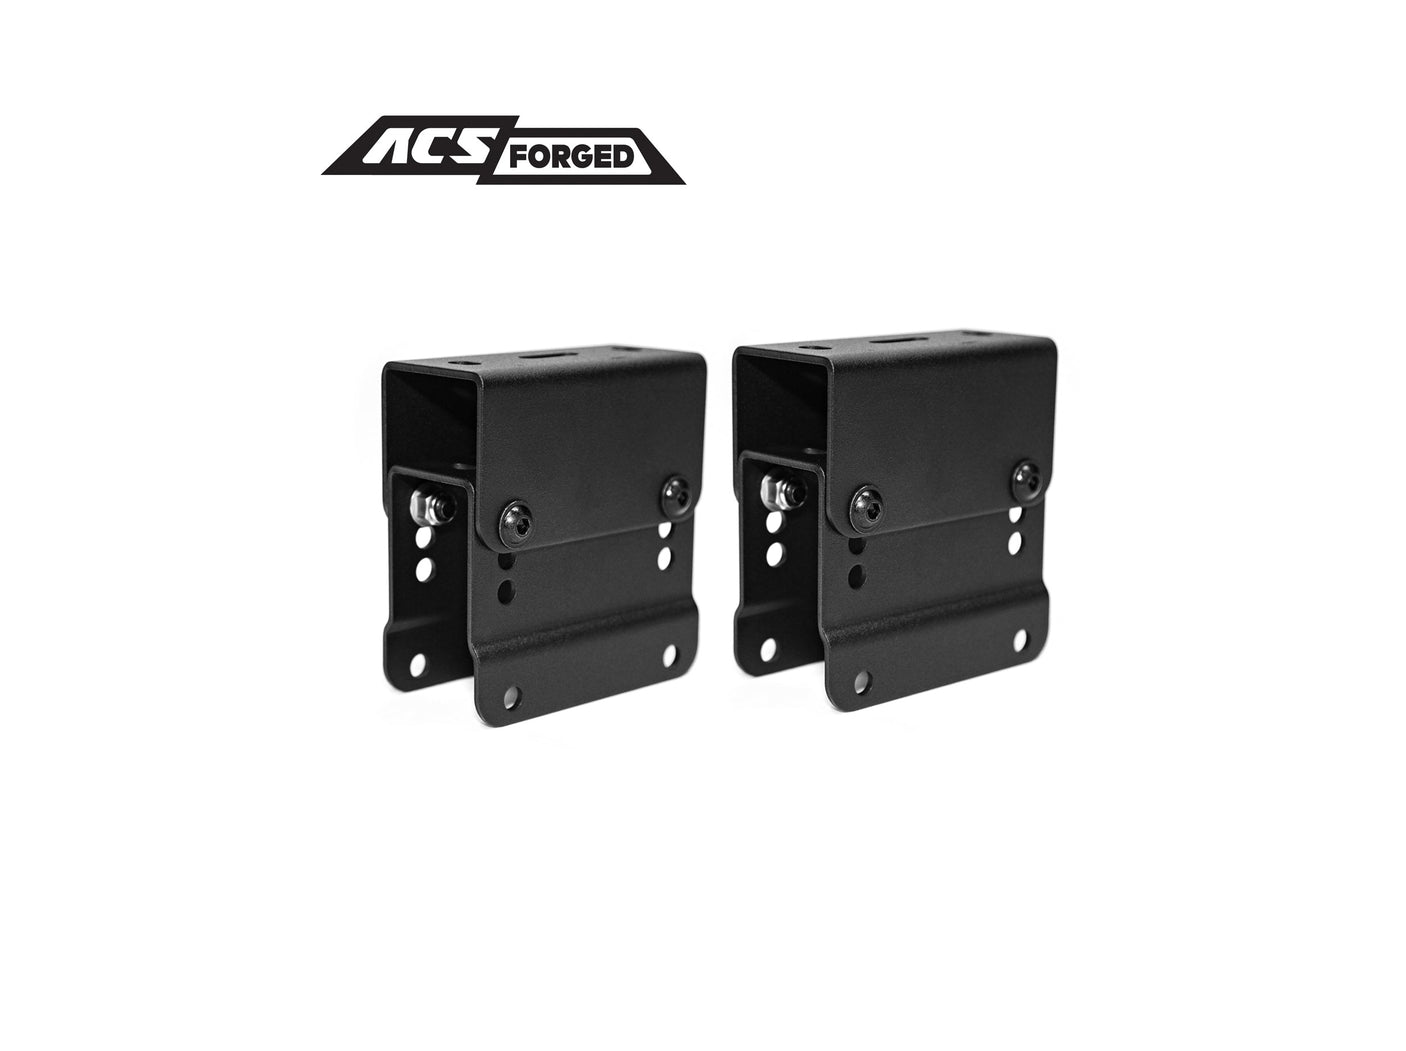 Load Bar Rise Kit for ACS FORGED